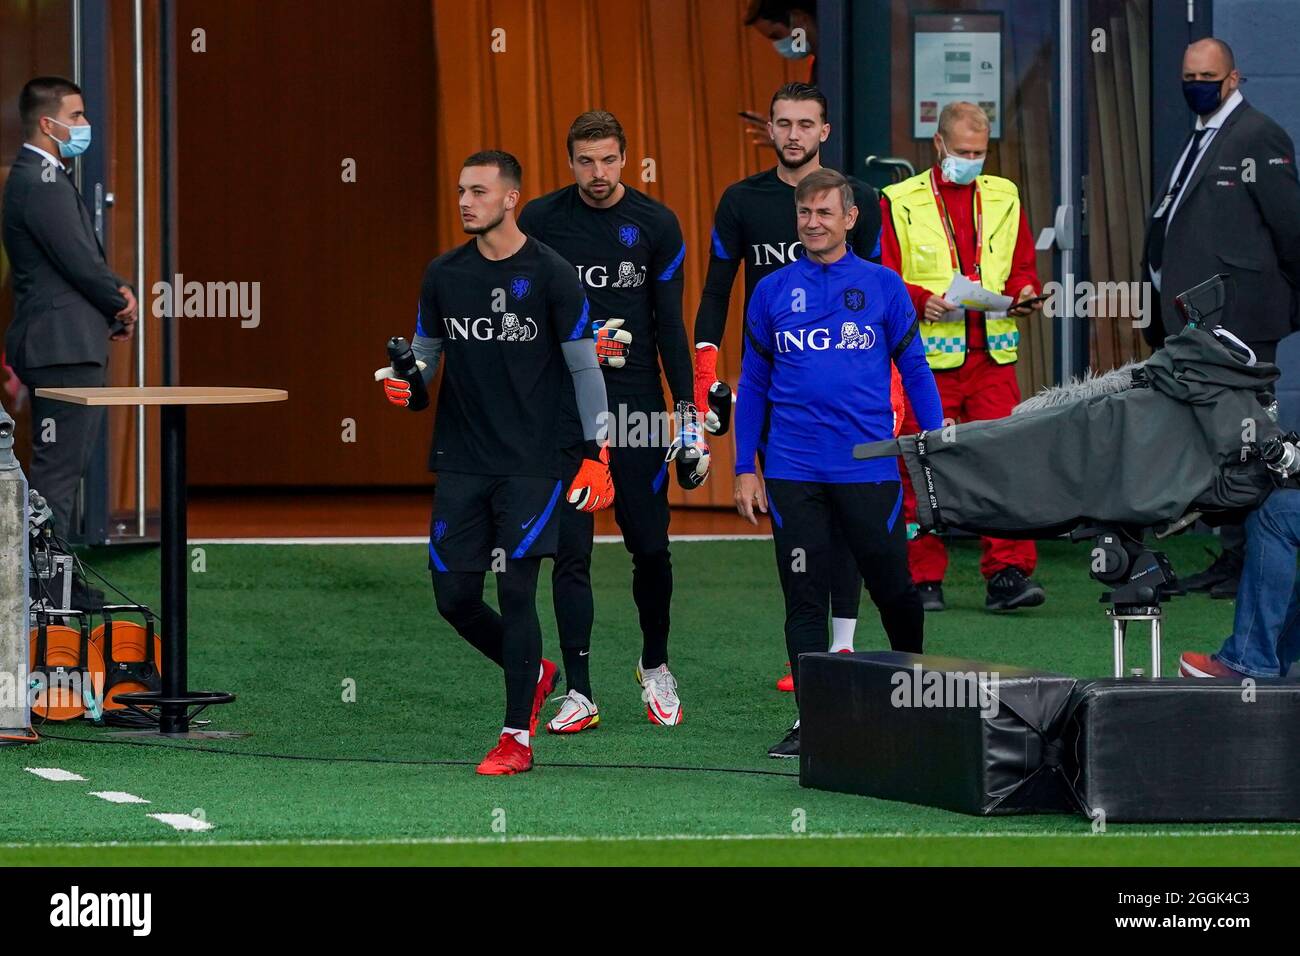 OSLO, NORWAY - SEPTEMBER 1: Goalkeeper Justin Bijlow of the Netherlands, Goalkeeper Tim Krul of the Netherlands, Goalkeeper Joel Drommel of the Netherlands, goalkeeper trainer Frans Hoek of the Netherlands during the World Cup Qualifier match between Norway and Netherlands at Ullevaal Stadium on September 1, 2021 in Oslo, Norway (Photo by Andre Weening/Orange Pictures) Stock Photo